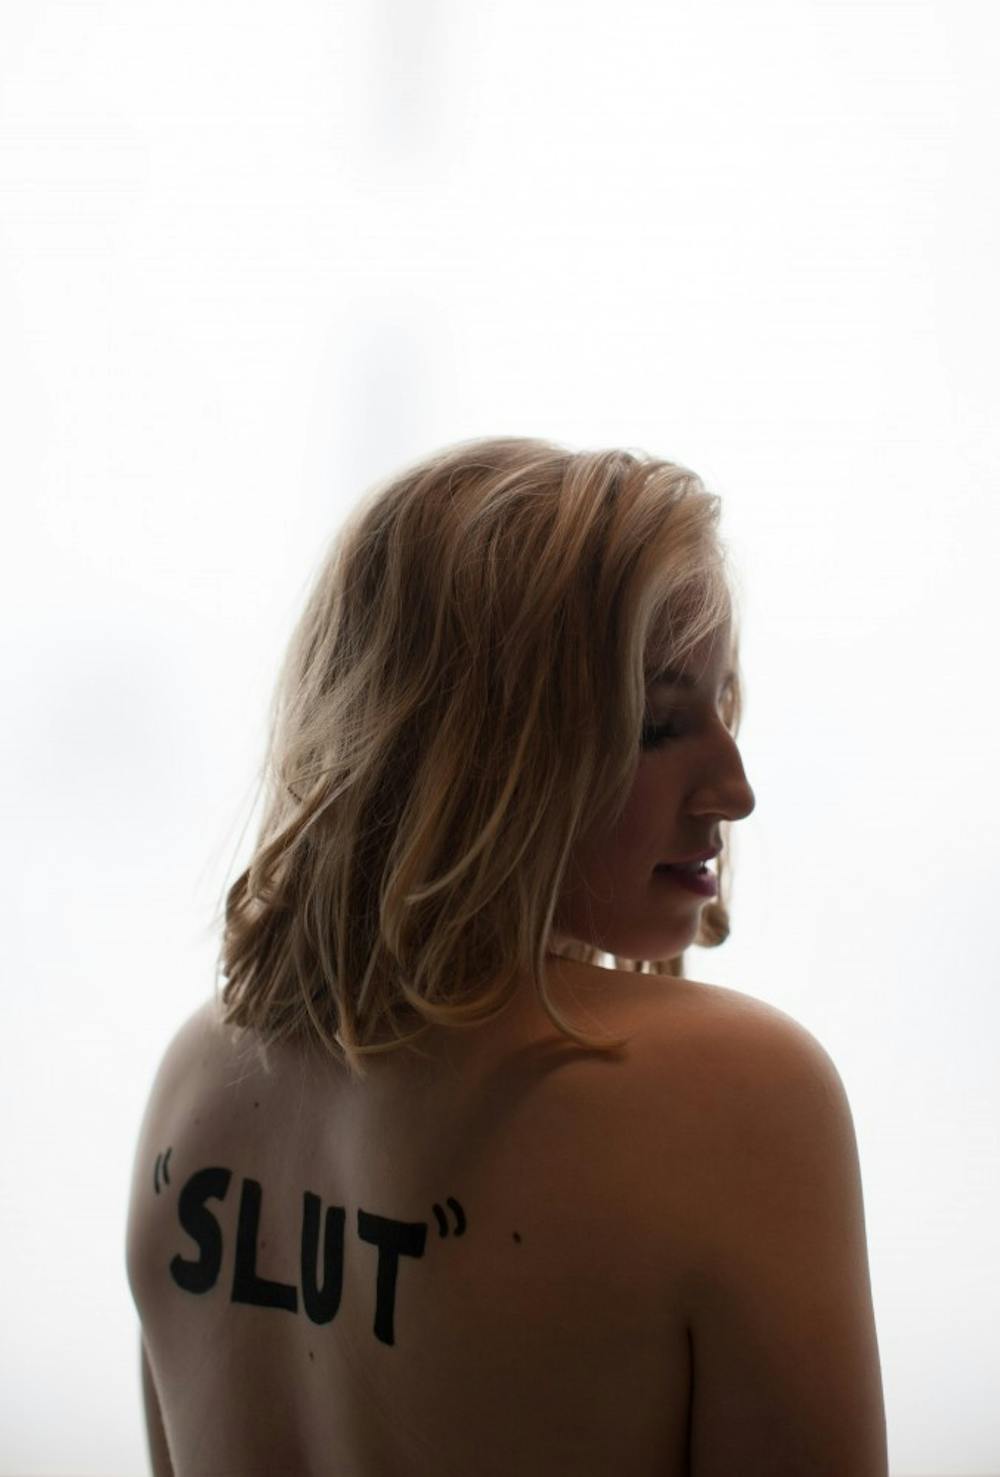 Slut shaming is as unavoidable as not trying not to judge a book by its cover. It's all the same.
Photo by Perla Farias